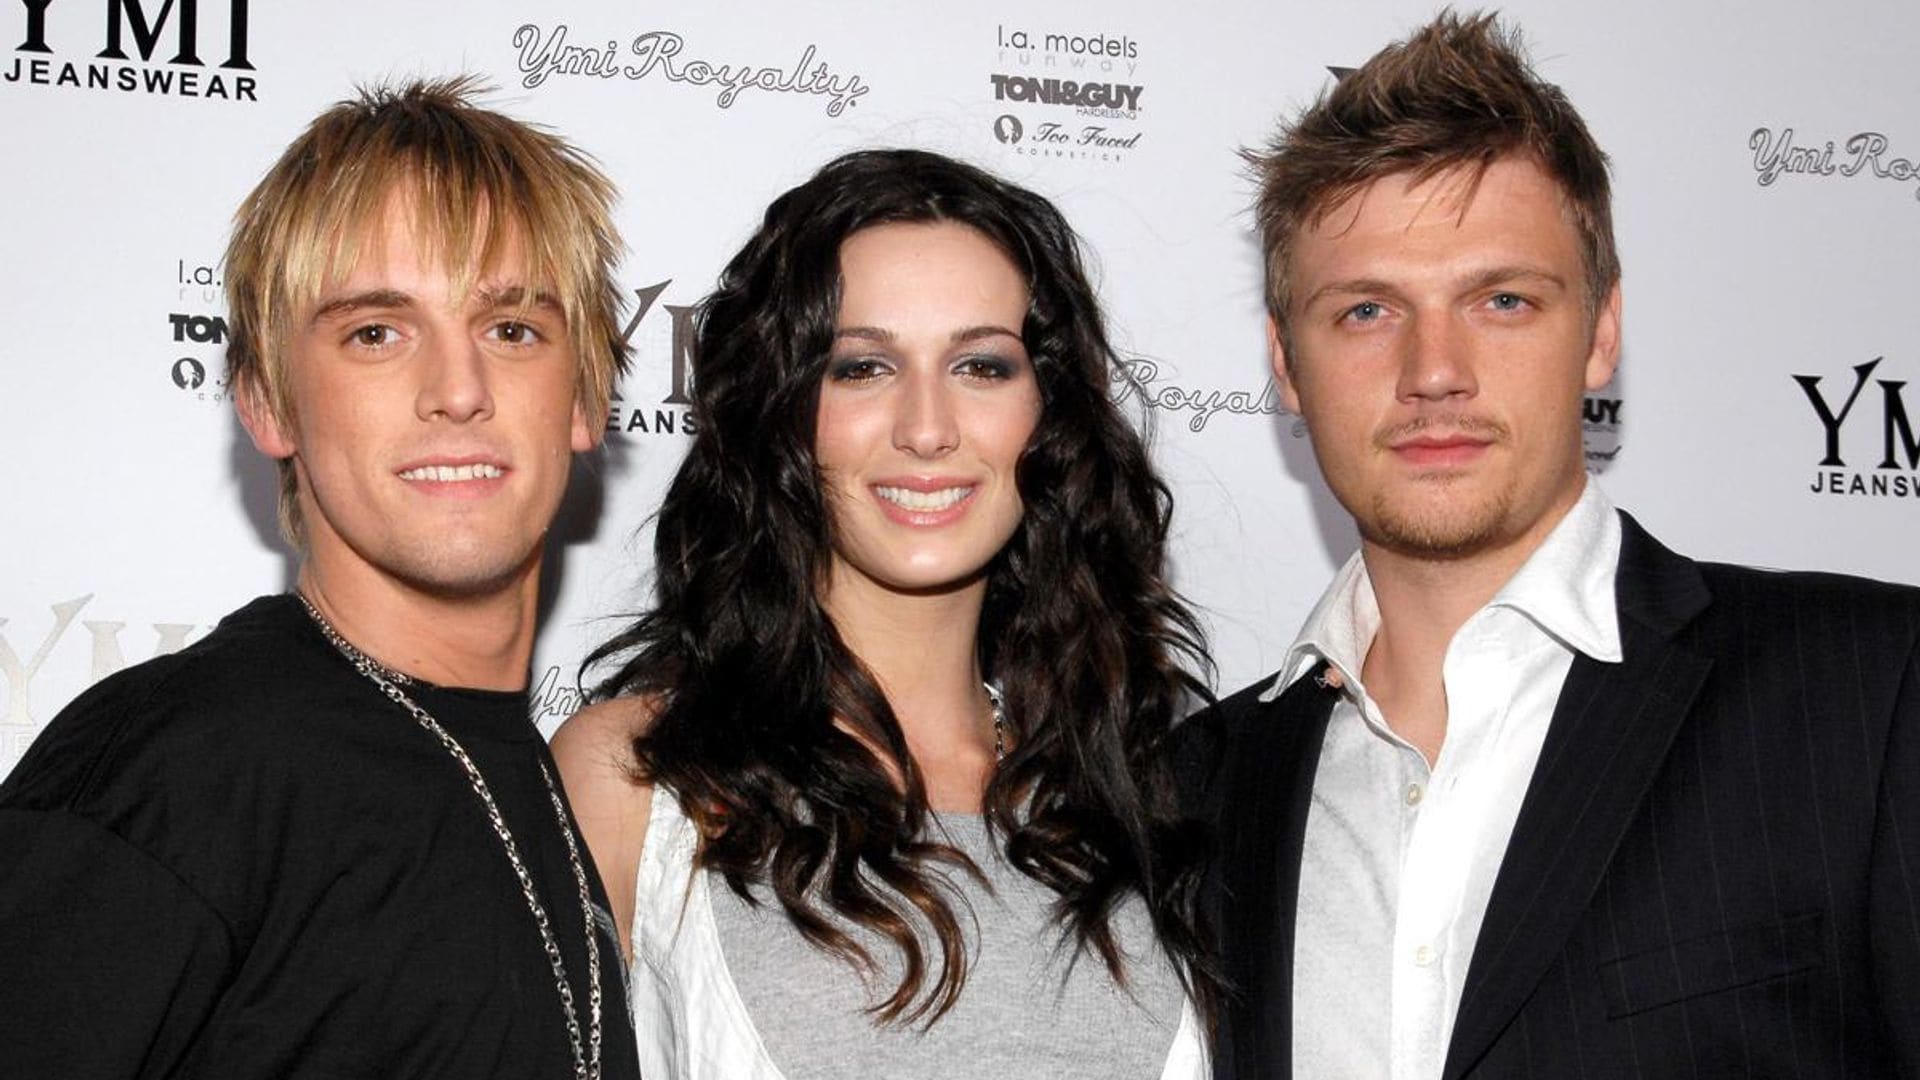 Aaron Carter, Angel Carter and Nick Carter at YMI Jeans Fashion Show and Party